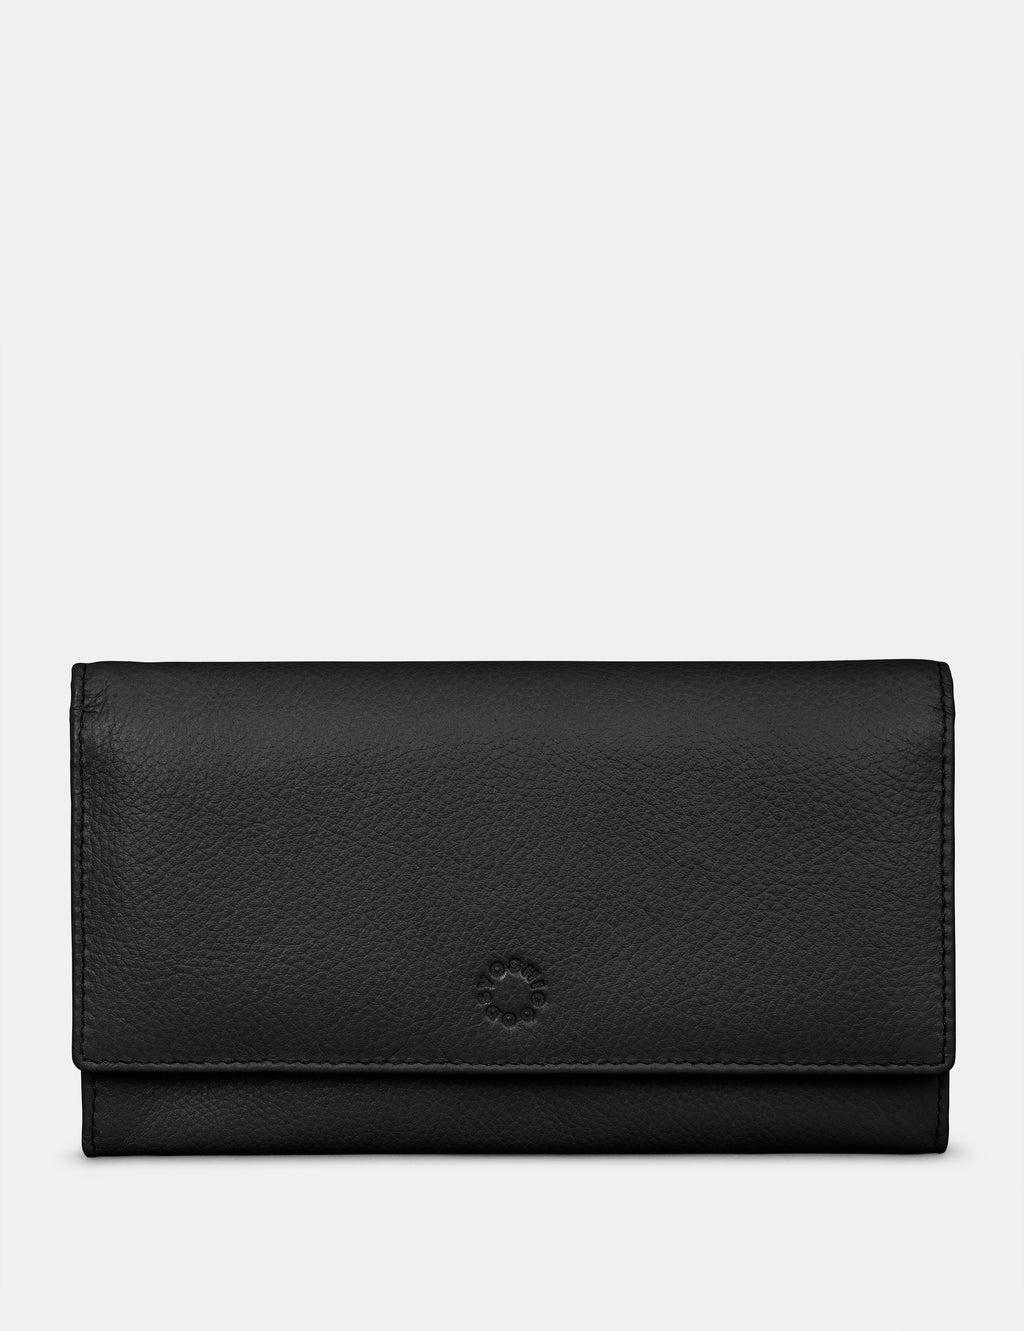 Hudson Flap Over Leather Purse